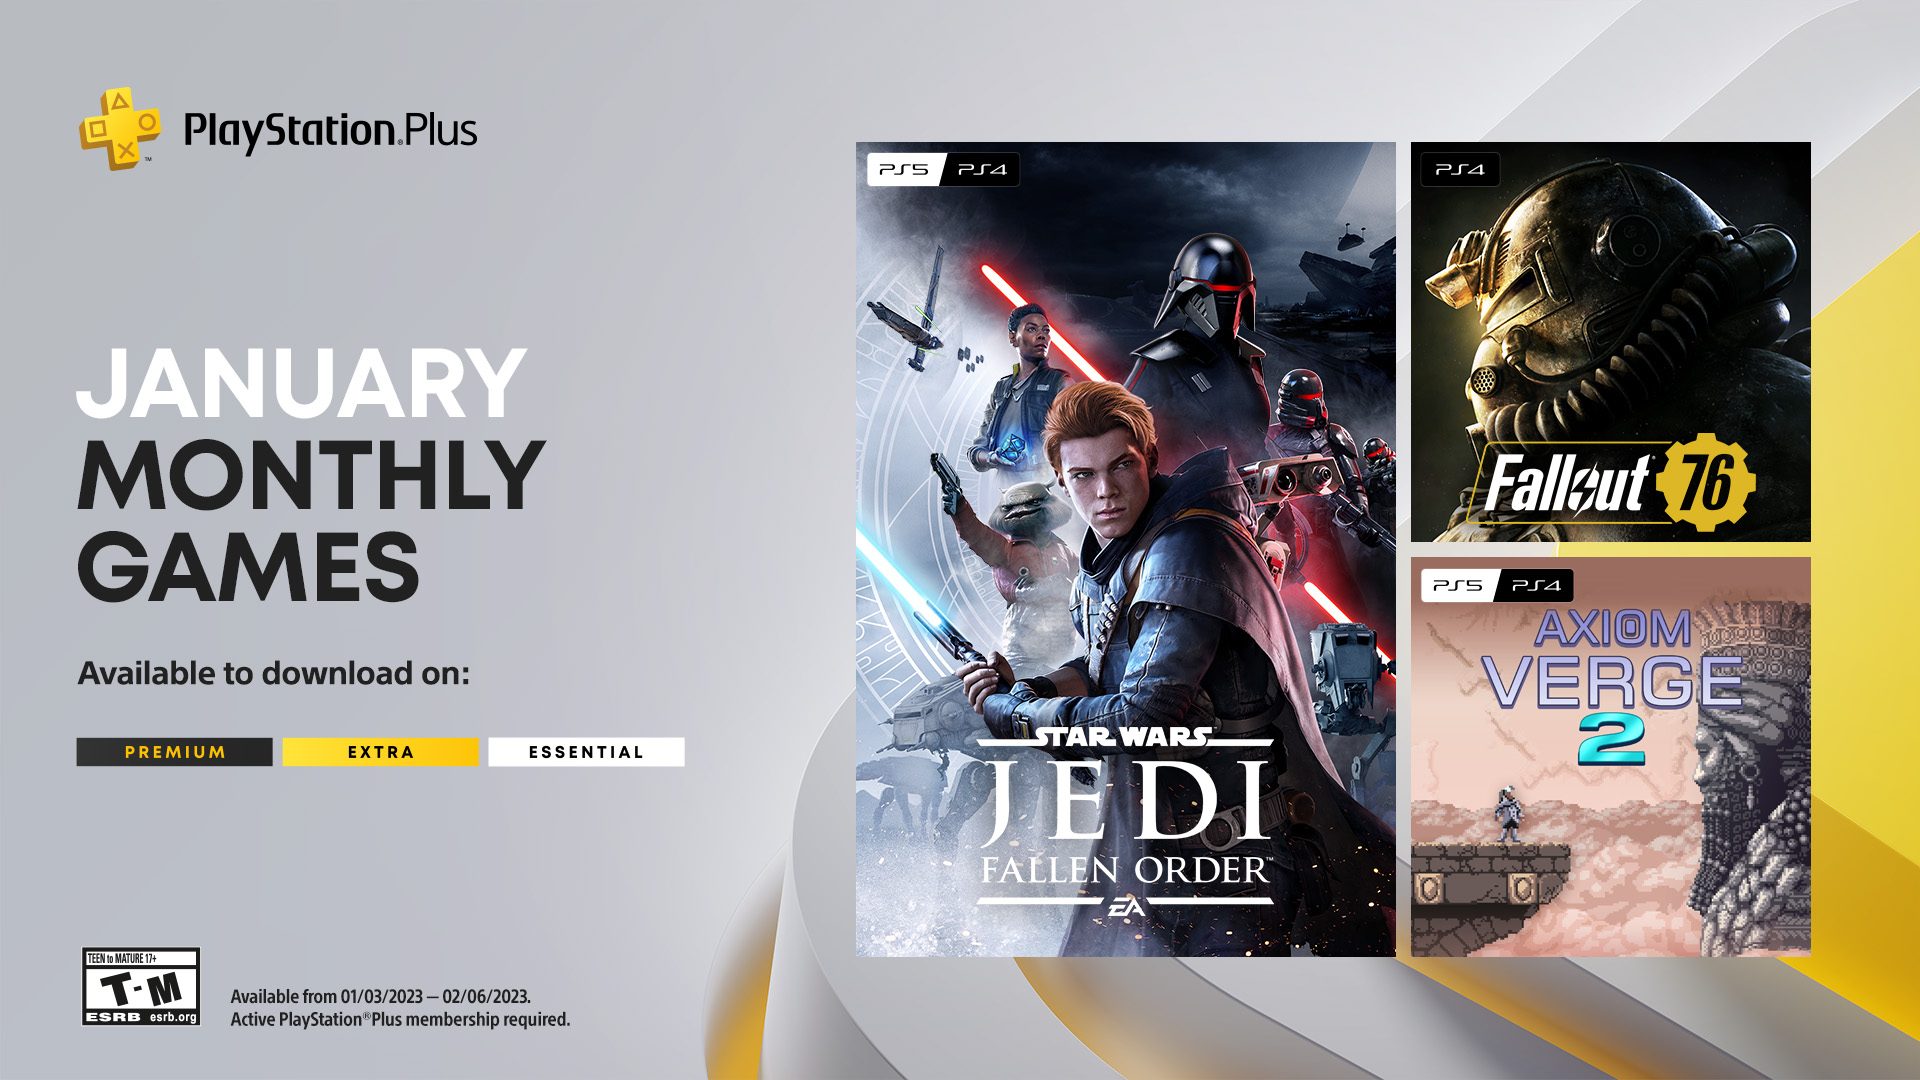 jury Conceit Lengtegraad PlayStation Plus Monthly Games for January: Star Wars Jedi: Fallen Order,  Fallout 76, Axiom Verge 2 – PlayStation.Blog